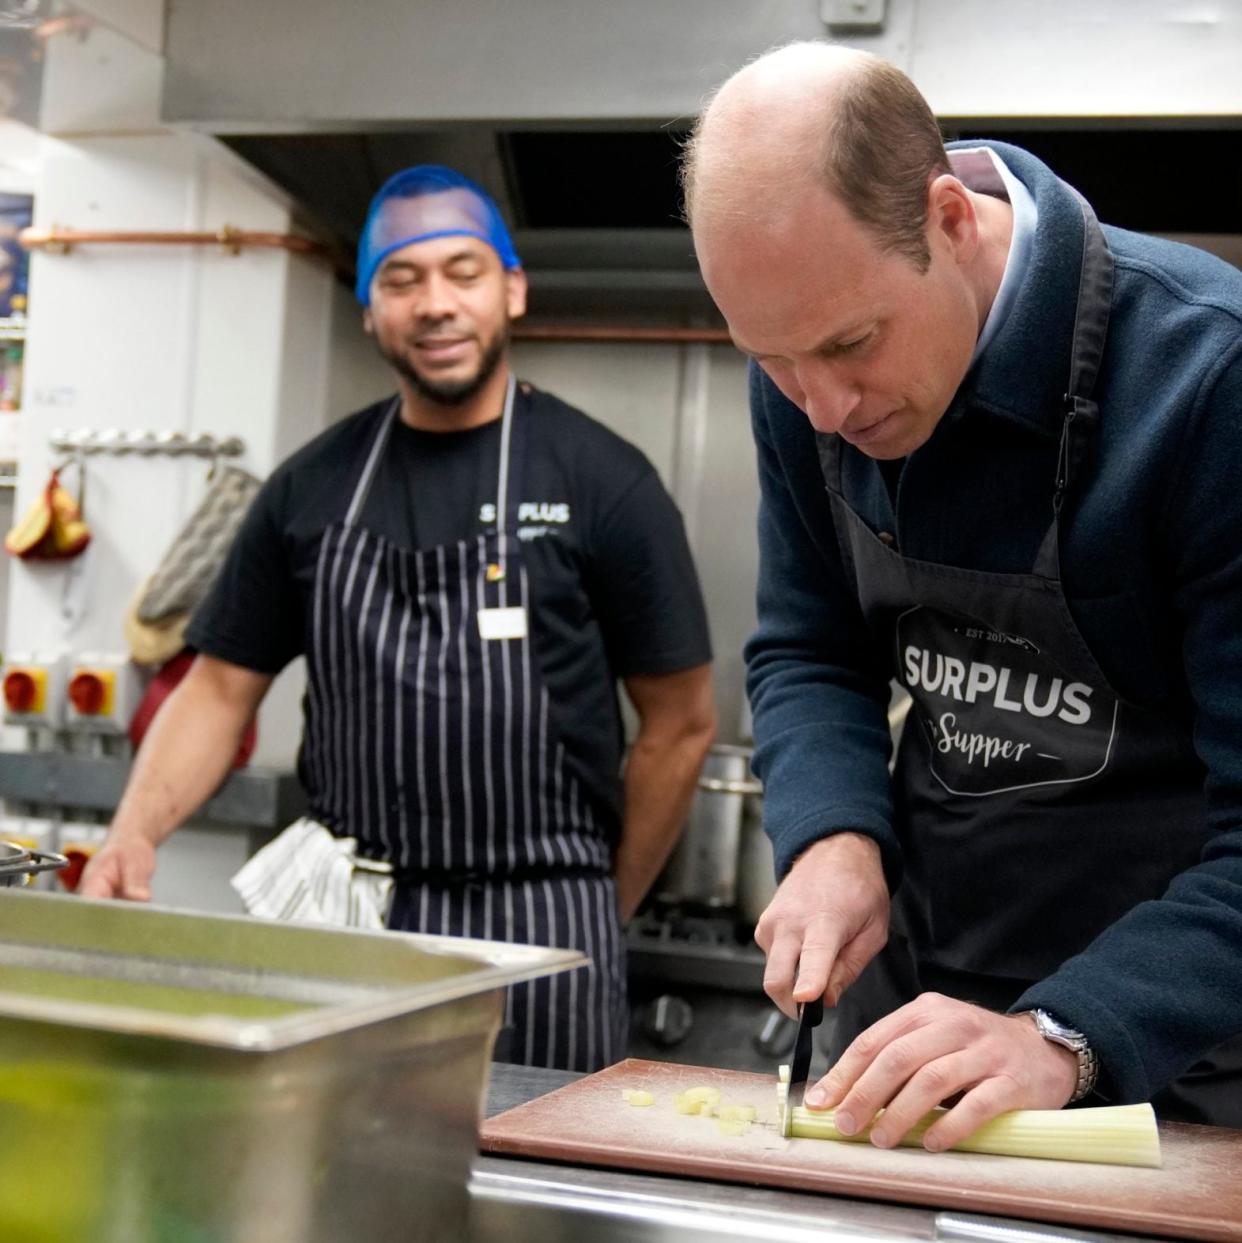 Britain's Prince William cuts celery as he helps to make a bolognase sauce during the visit